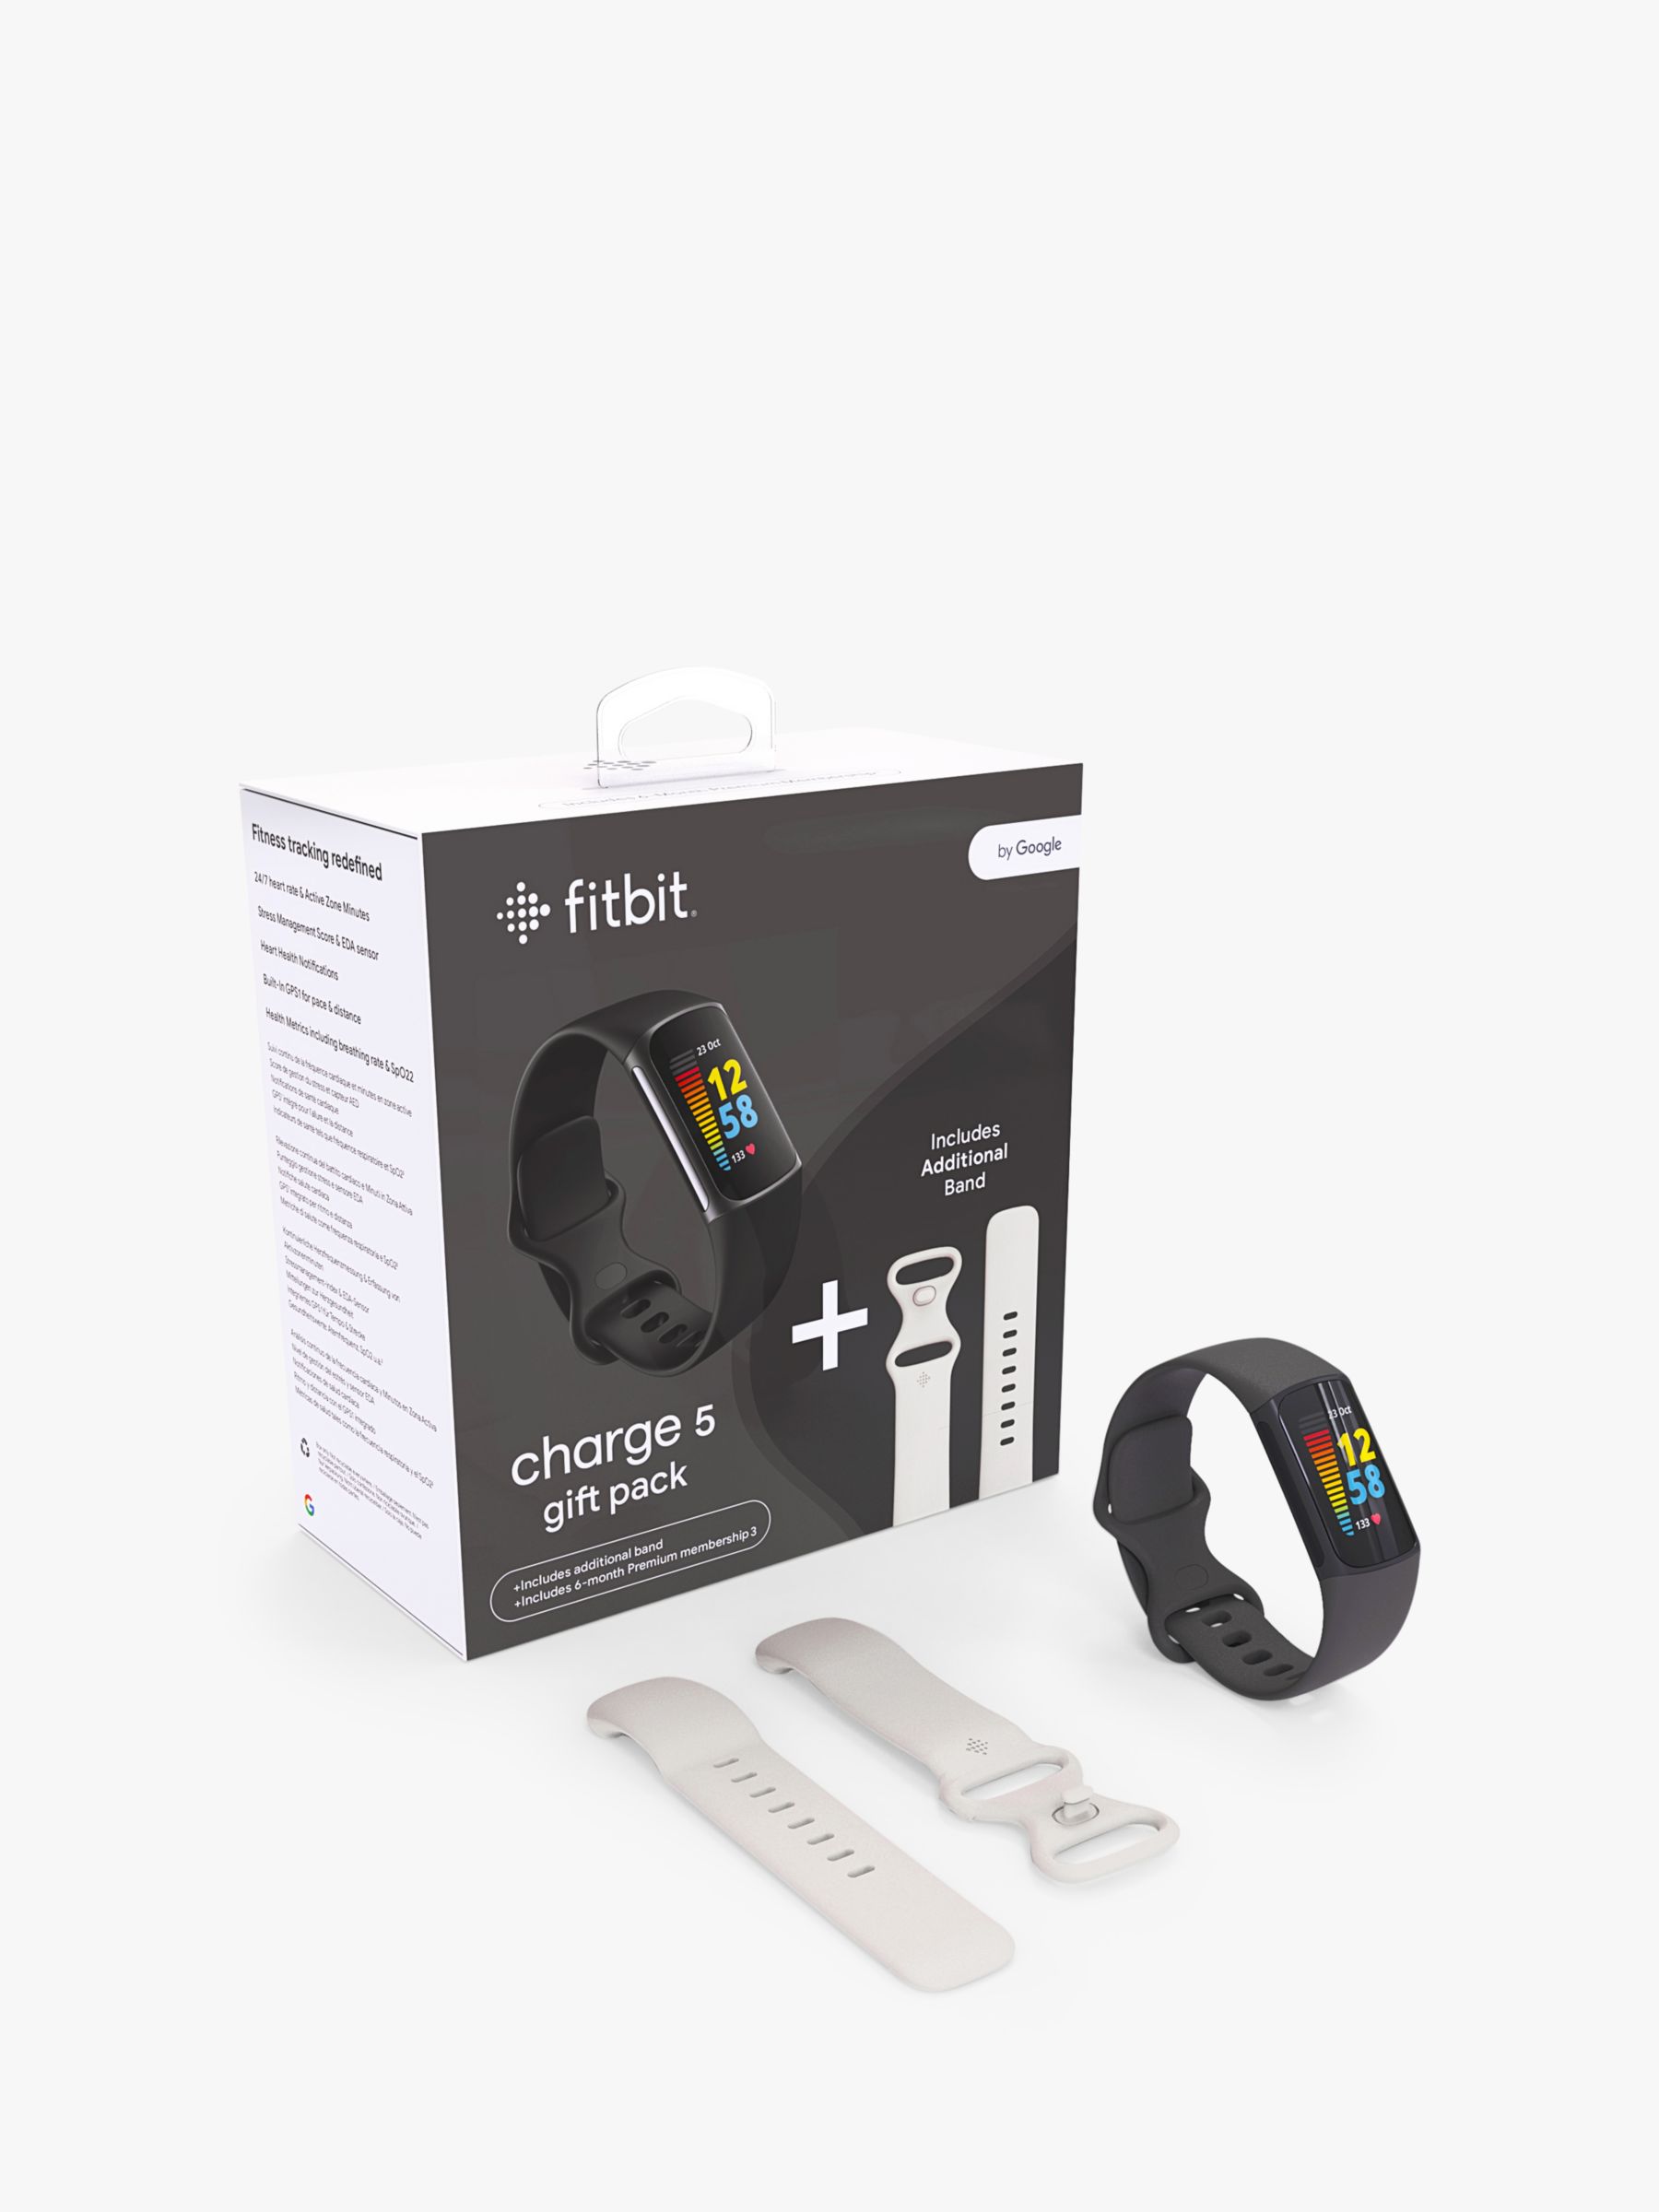 Fitbit Charge 5 Health and Fitness Tracker, Black, Gift Pack with 